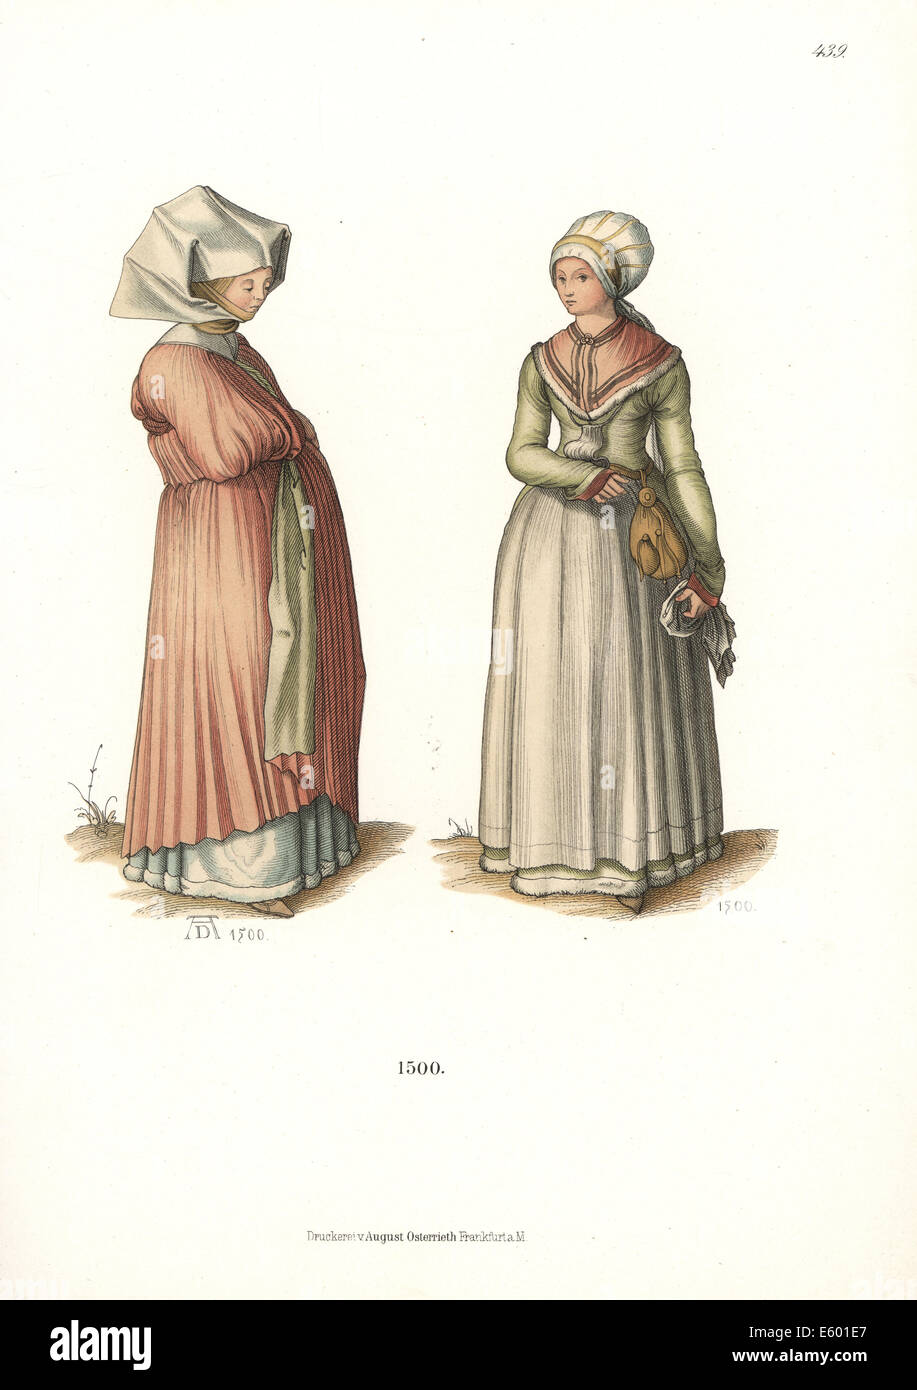 Woman in Sturz headdress and woman in domestic costume, 1500. Stock Photo